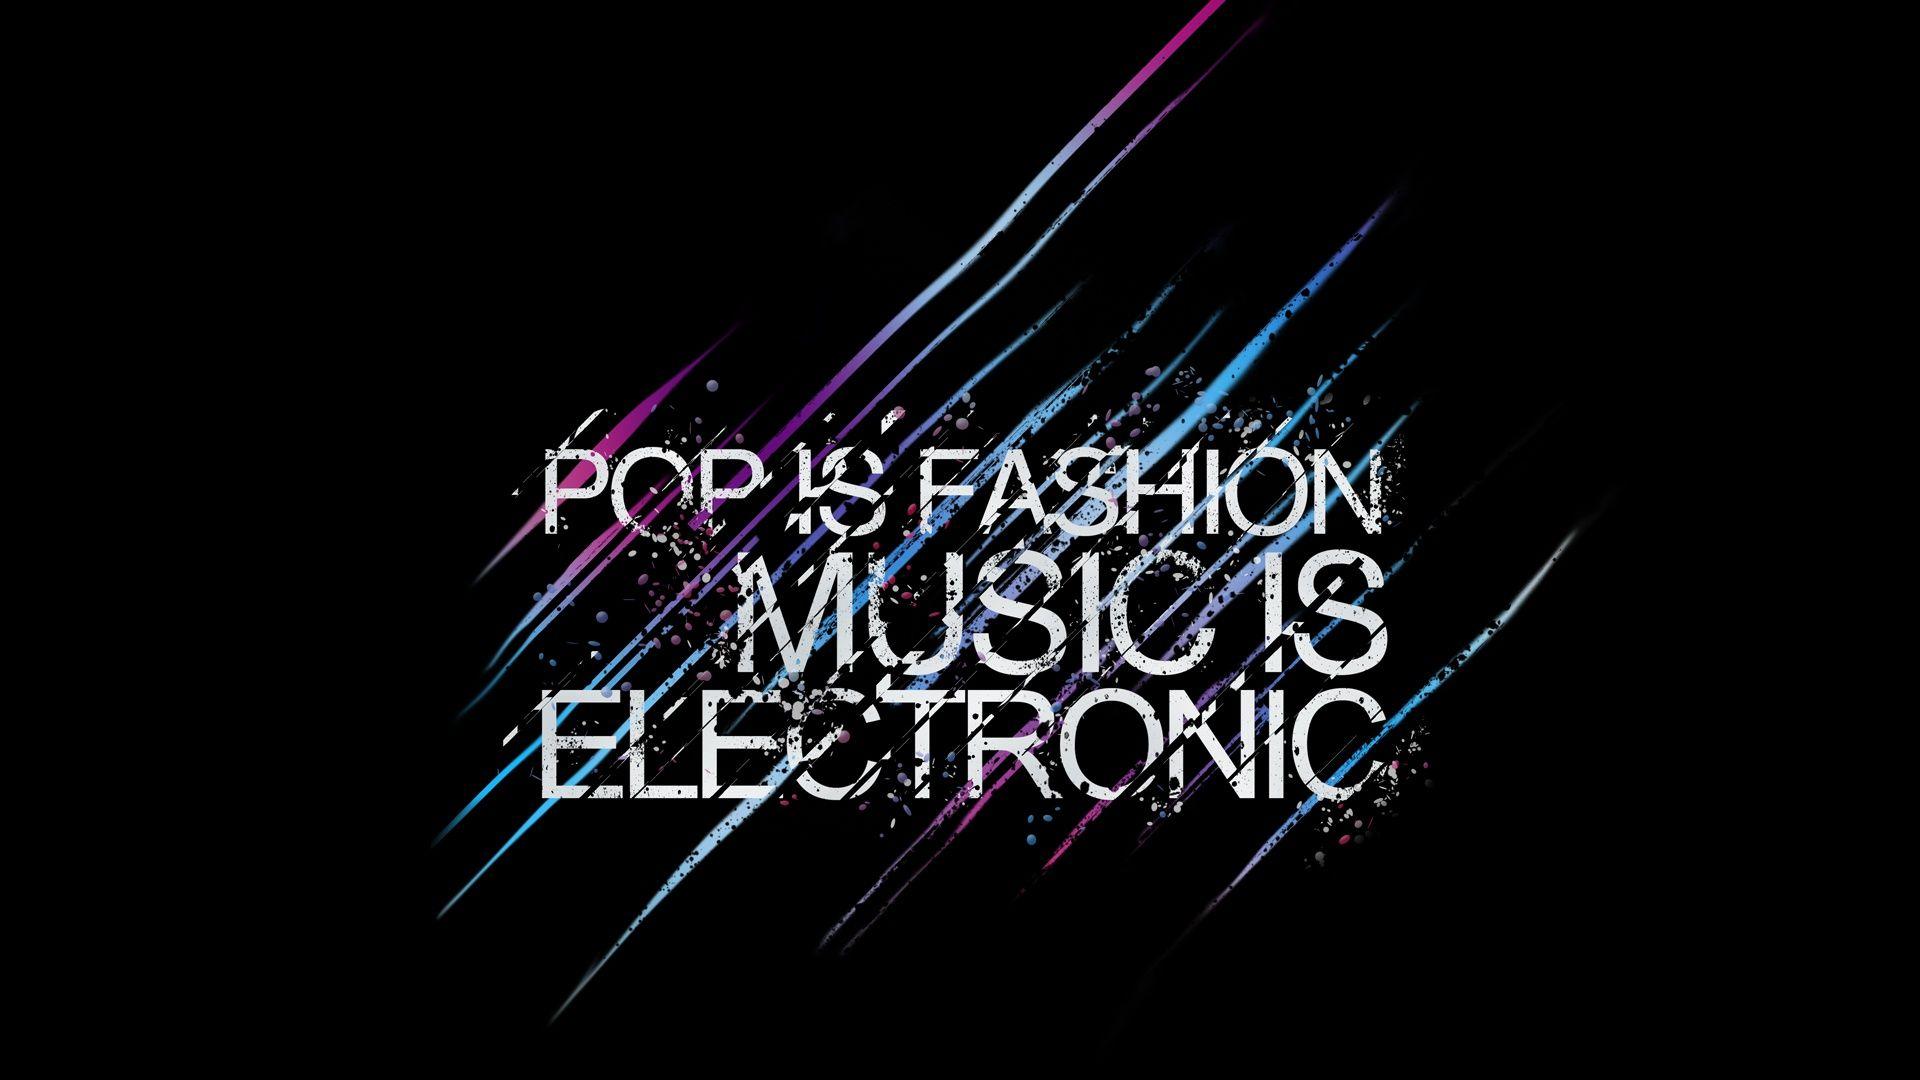 Free 1920x1080 Electro Power Music Wallpaper Full HD 1080p Background